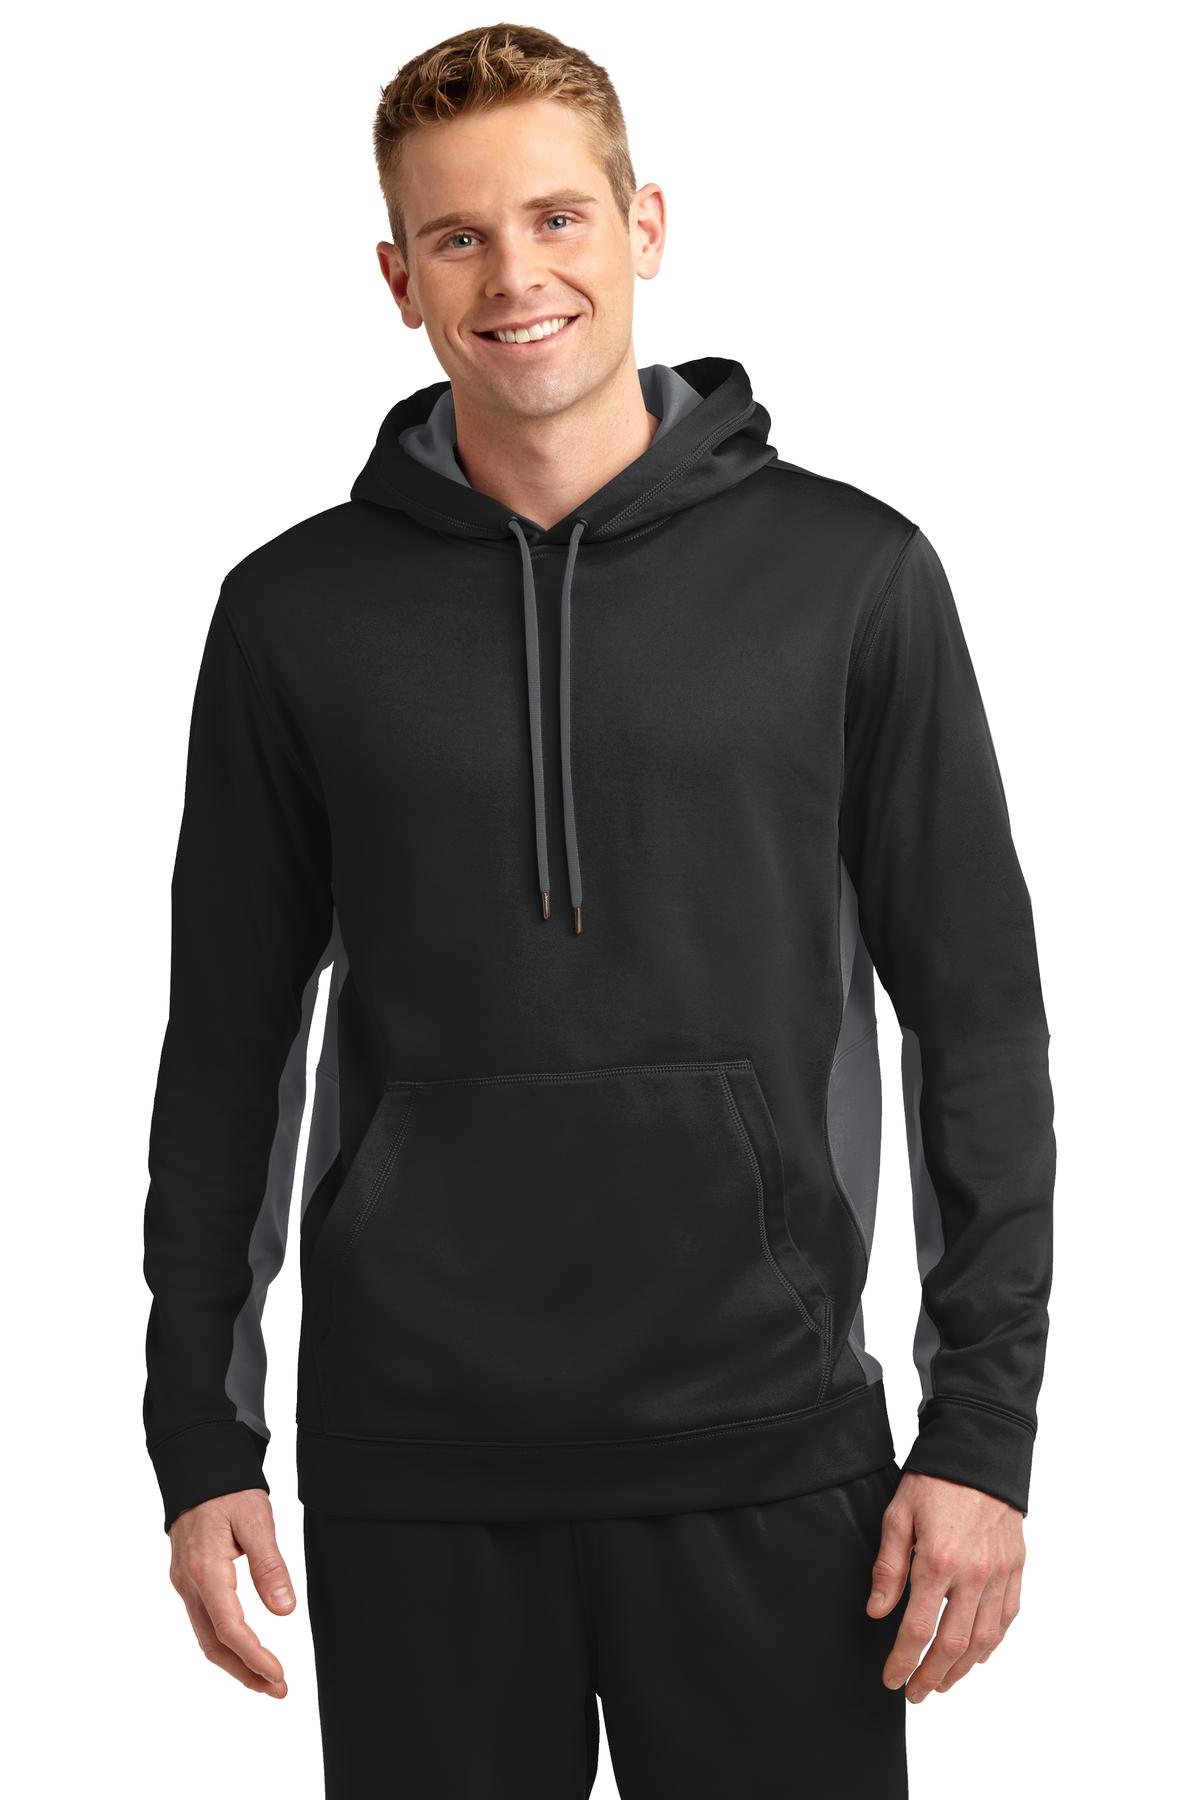 Front view of Sport-Wick® Fleece Colorblock Hooded Pullover